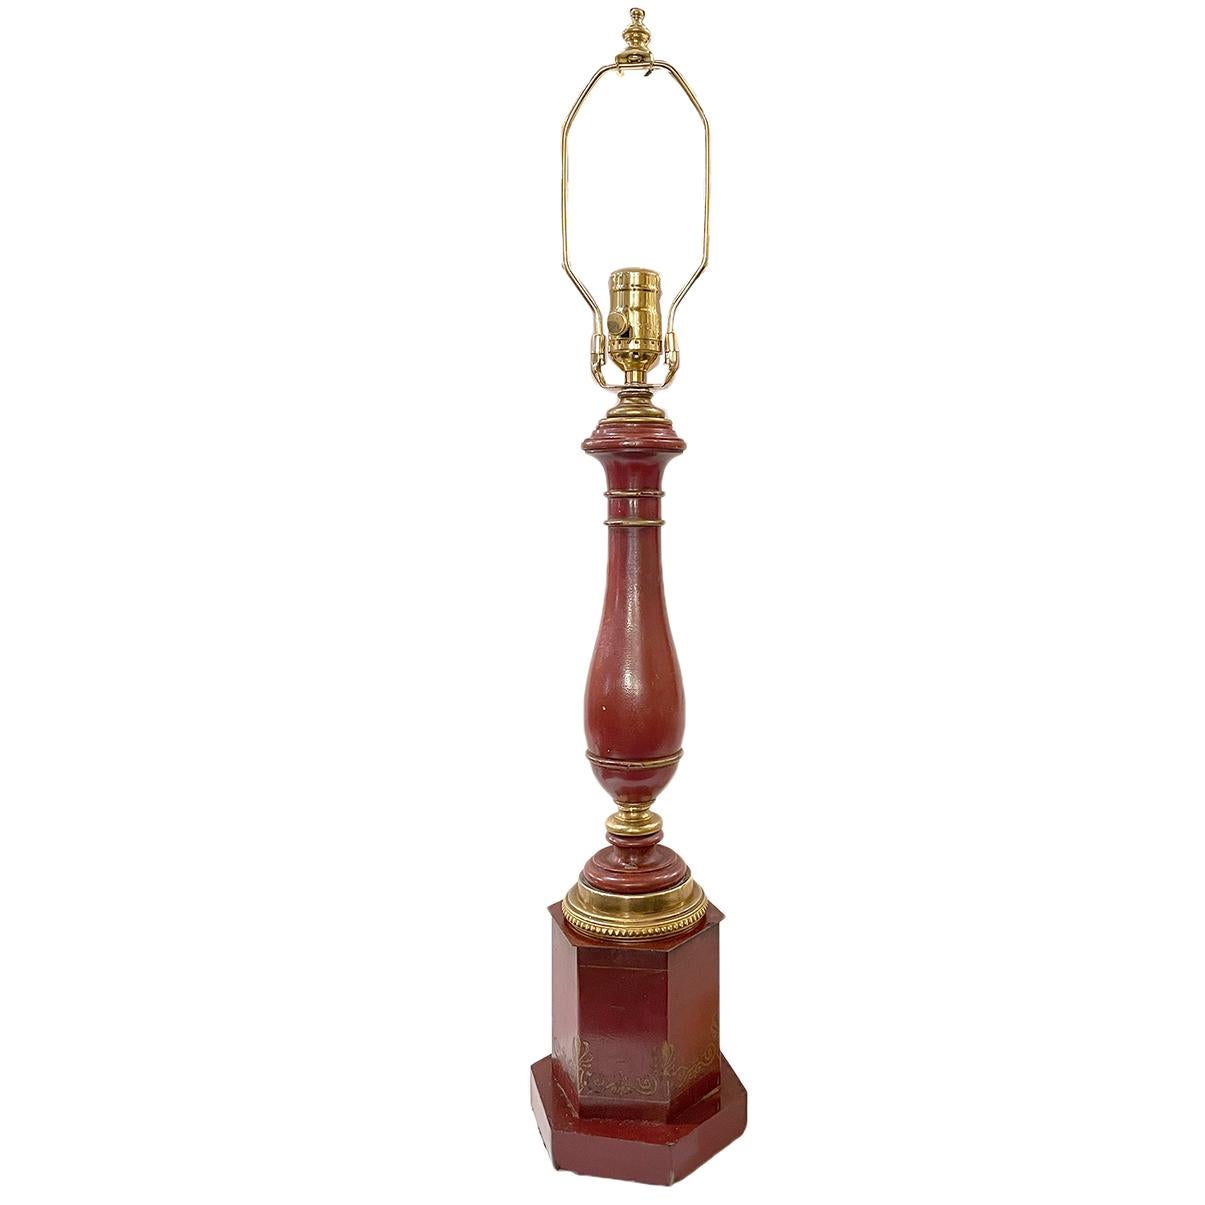 A circa 1920's French painted tole table lamp with gilt details.

Measurements:
Height of body: 18.5